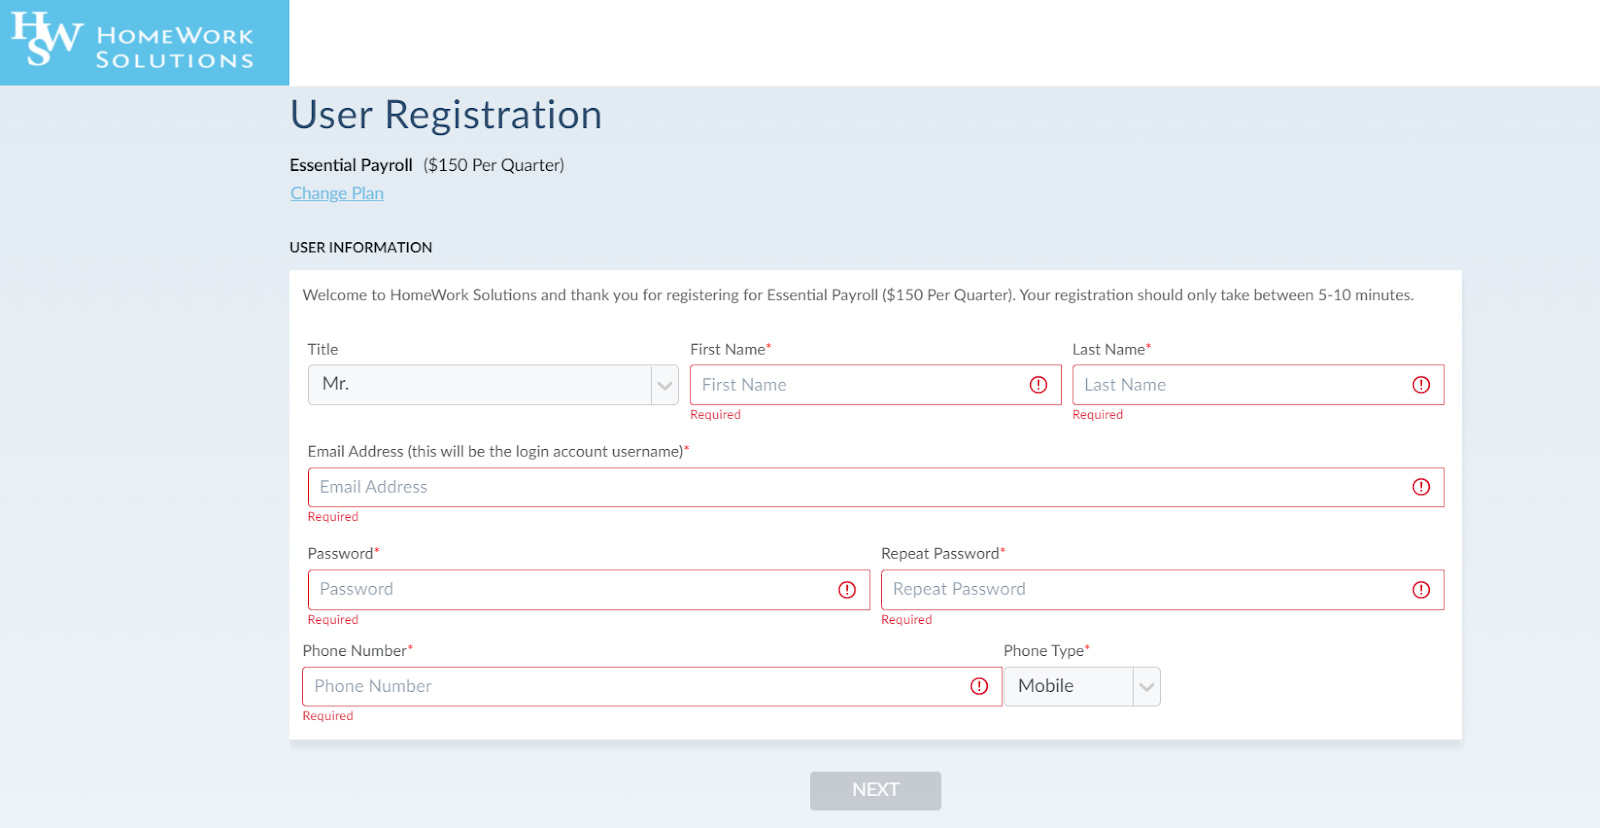 A users registration page from HomeWork Solutions where the users can input their information.